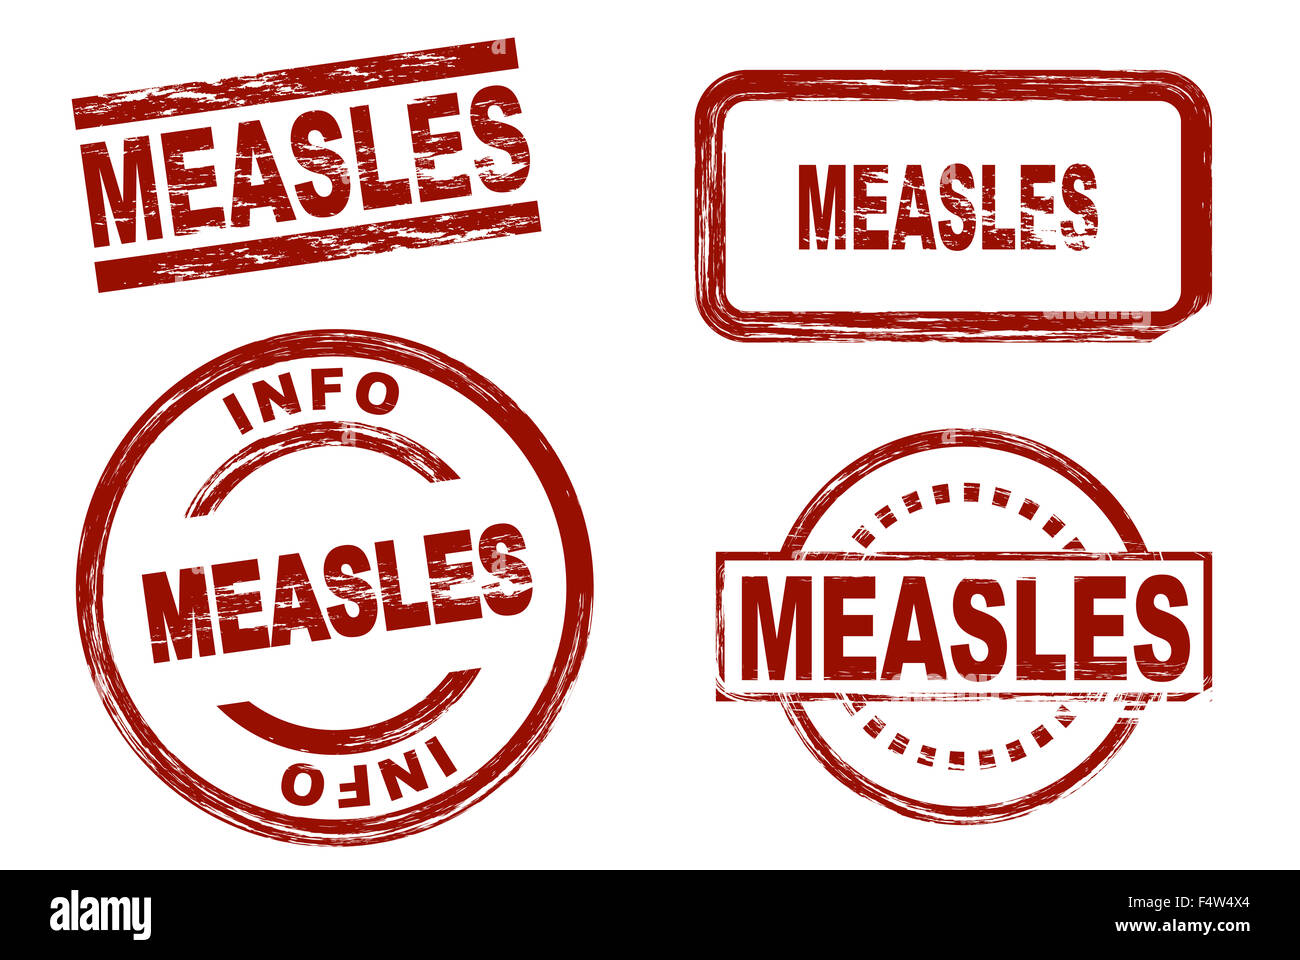 Set of stylized red stamps showing the term measles. All on white background. Stock Photo